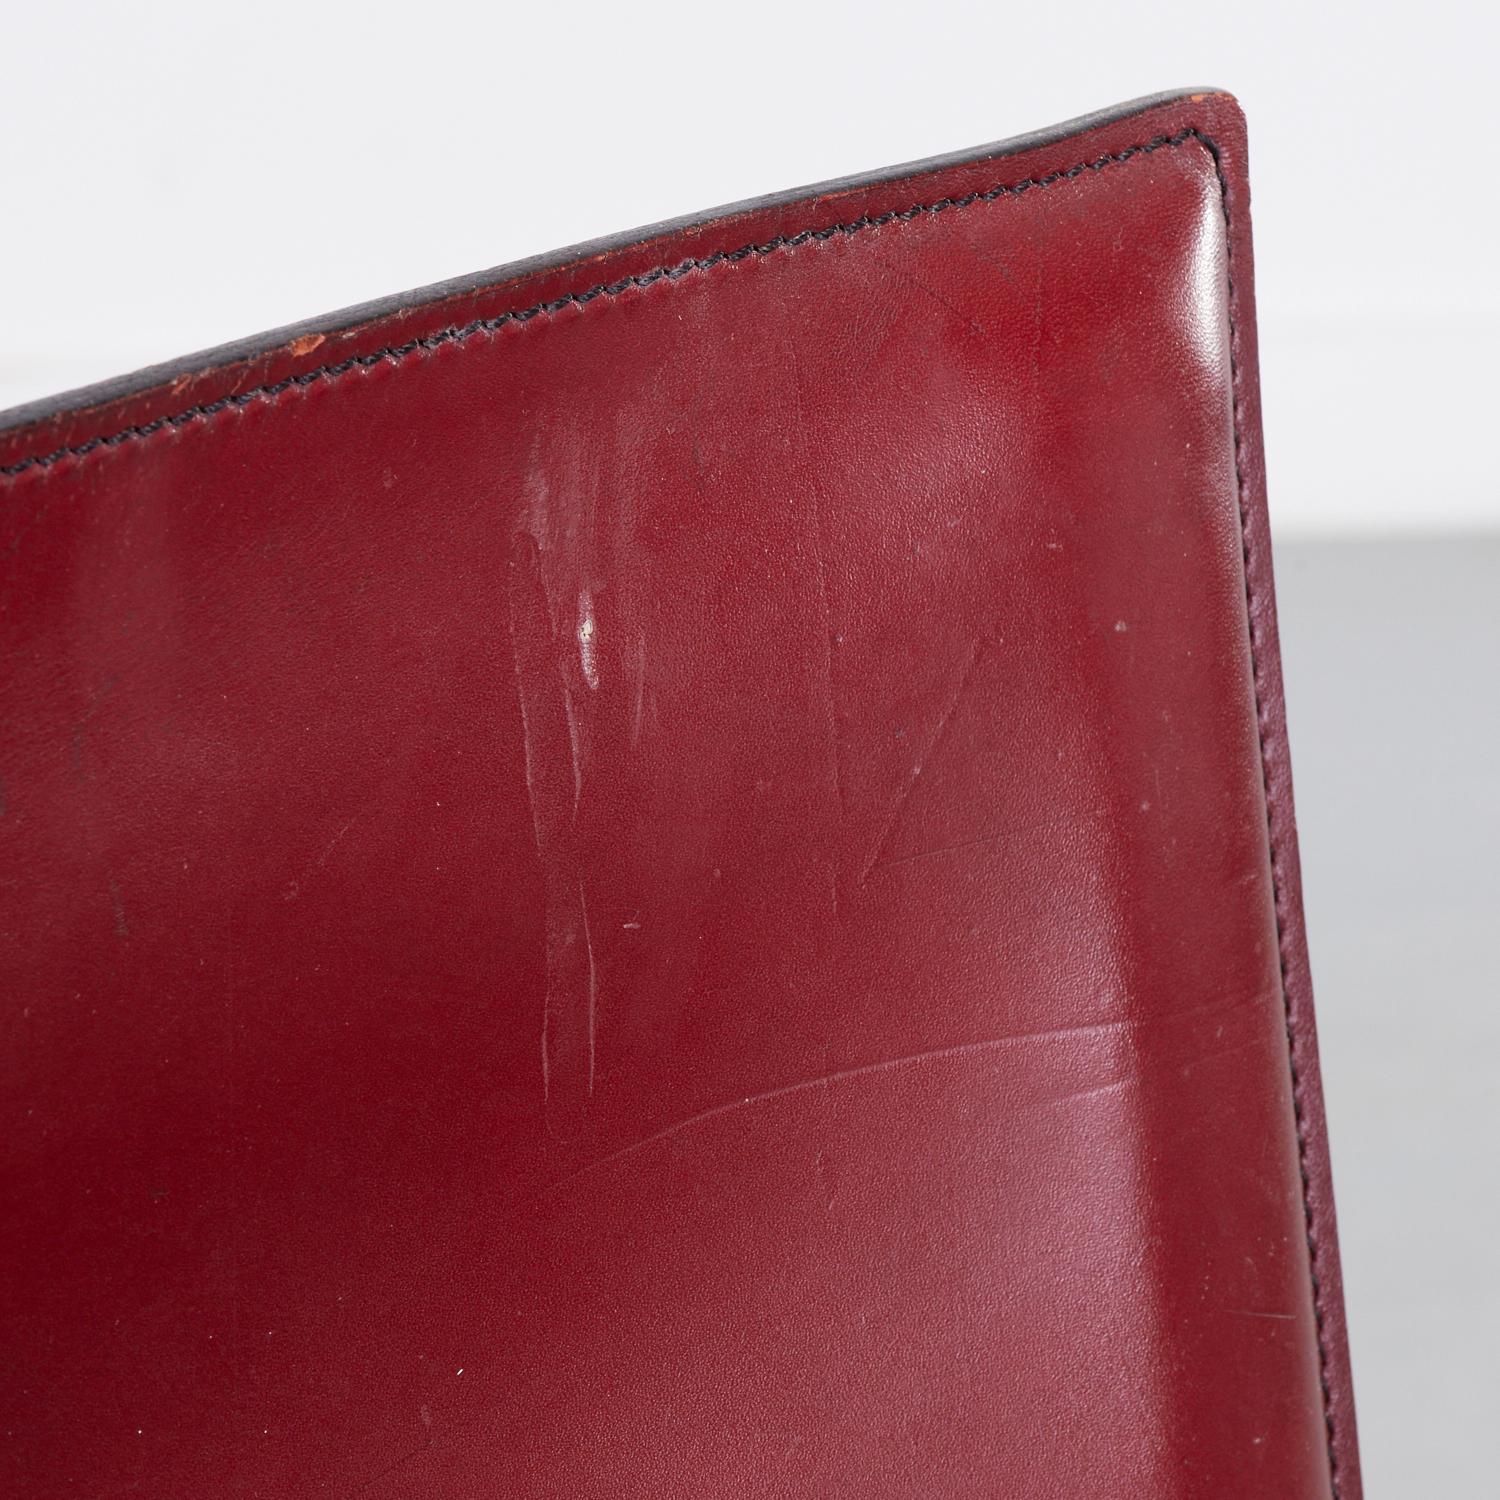 20th c., Italy, Enrico Pellizzoni oxblood saddle-stitched leather over metal frame and seat. These chairs were designed by Grassi & Bianchi. An embossed leather mark is present on the underside of each chair.

The Enrico Pellizzoni brand was created